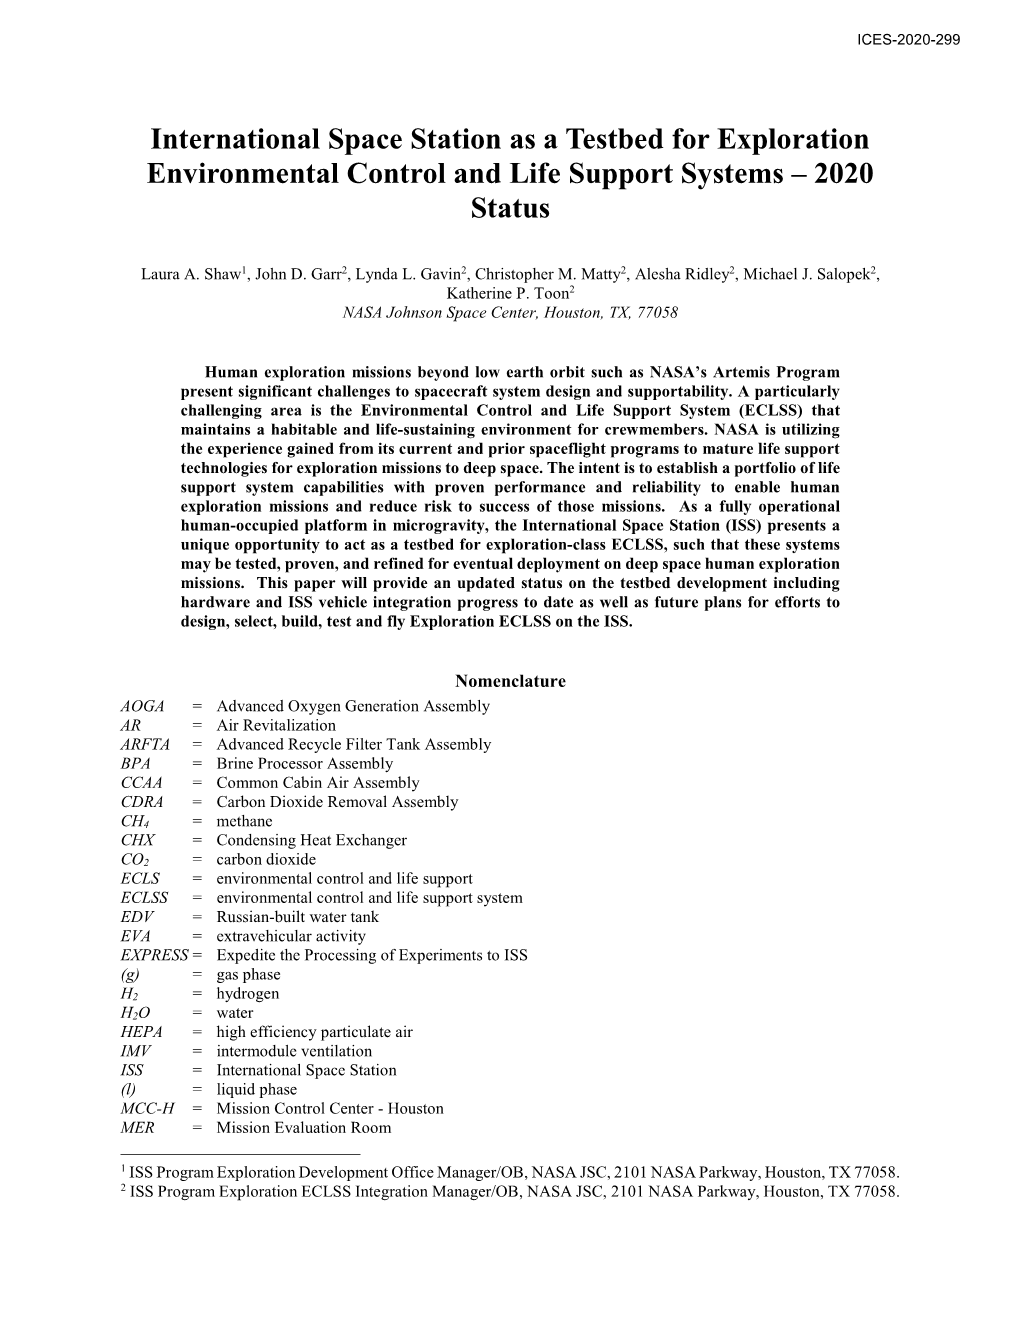 International Space Station As a Testbed for Exploration Environmental Control and Life Support Systems – 2020 Status